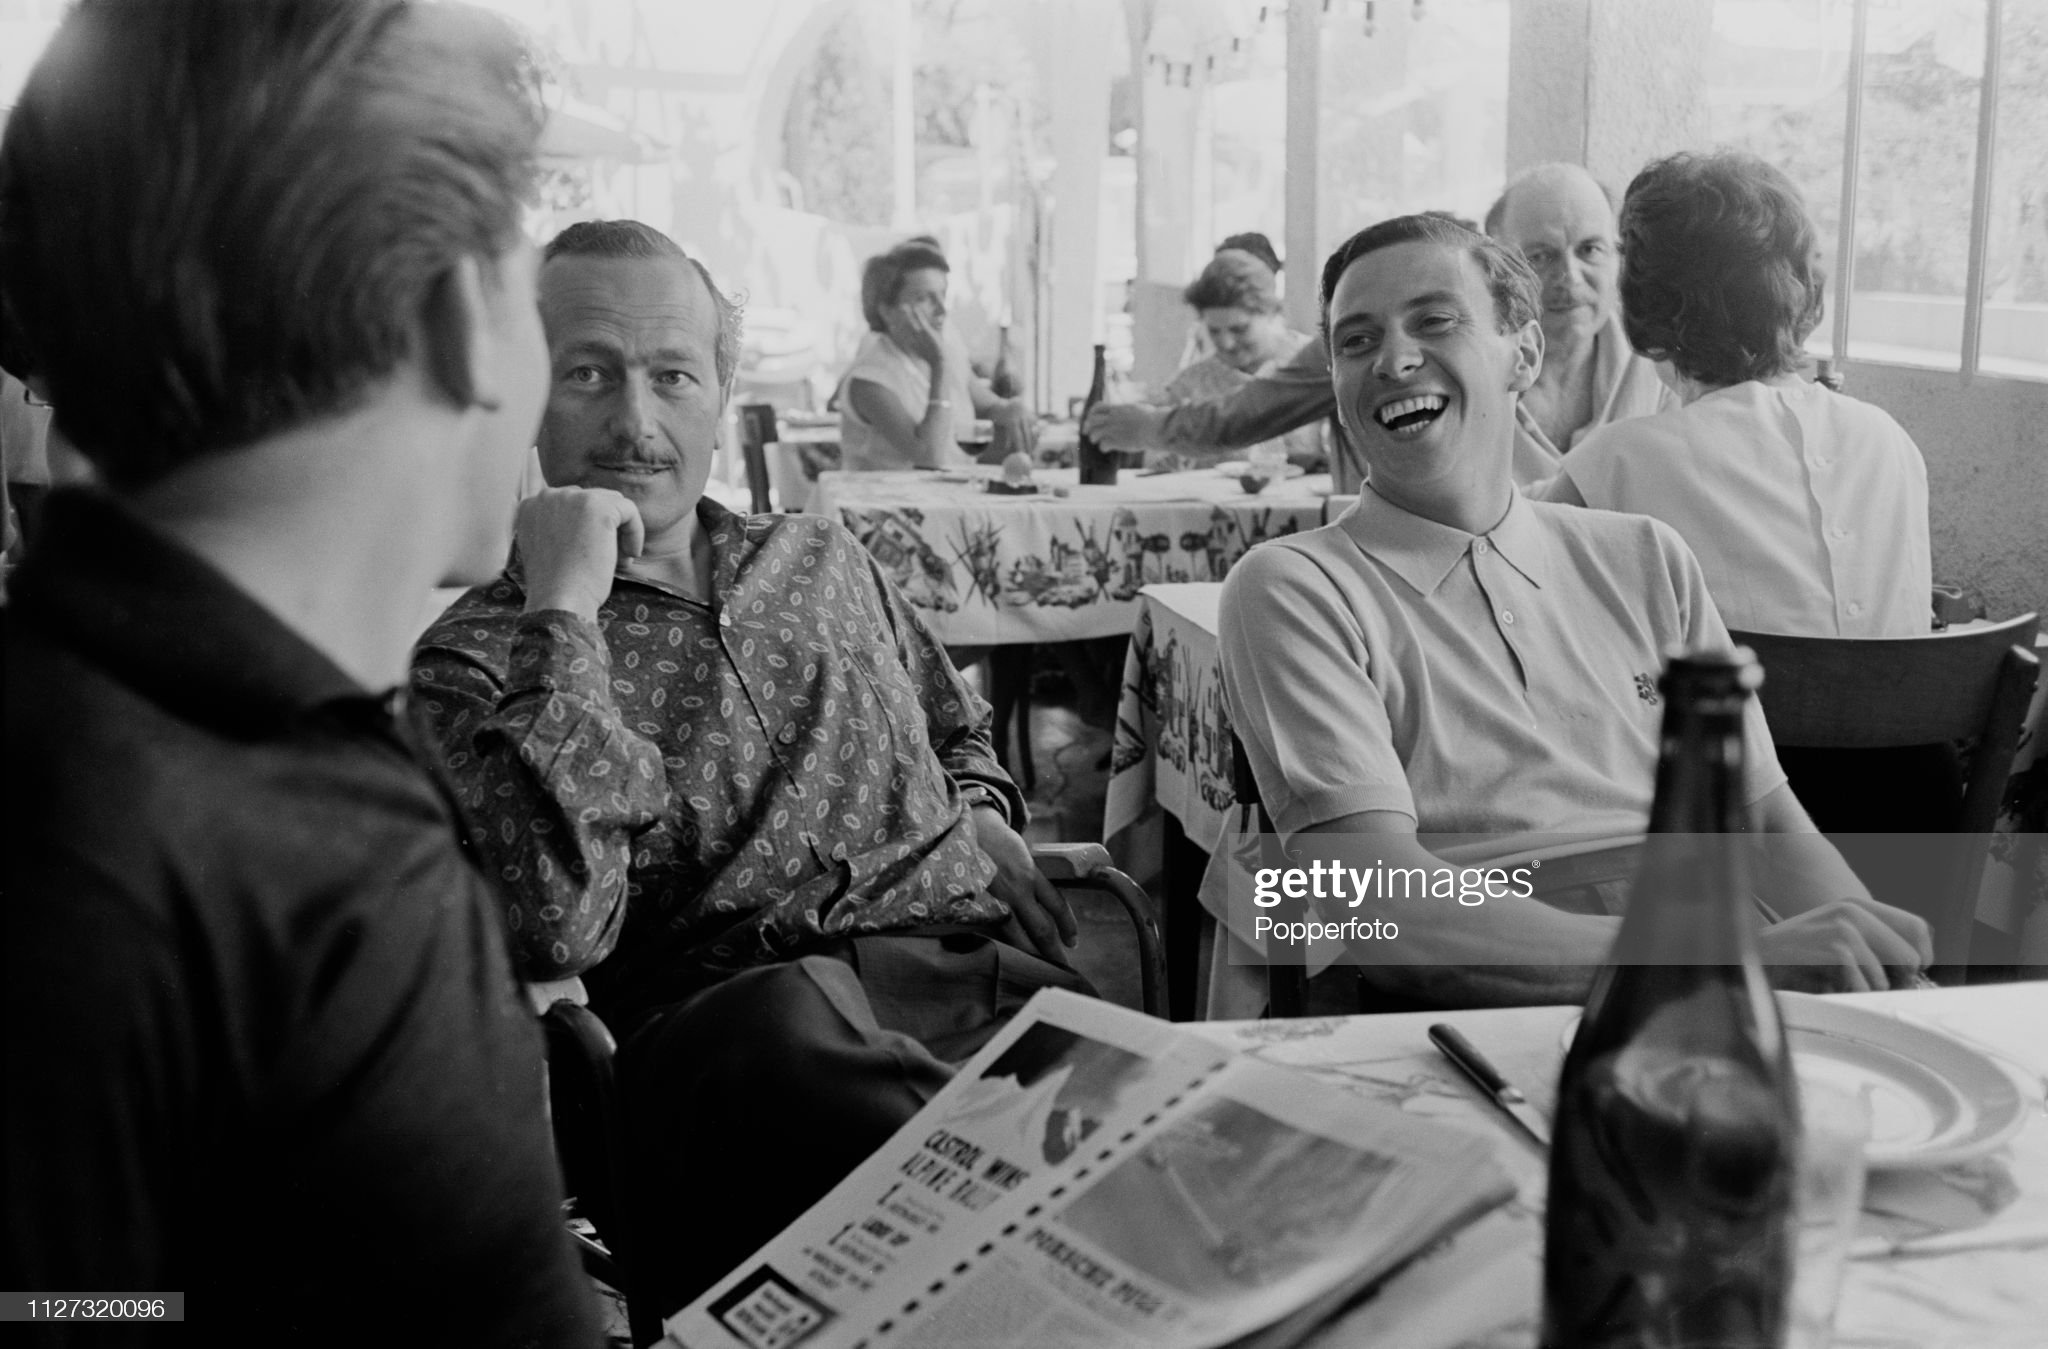 Jim Clark with Colin Chapman in a restaurant prior to competing in the n.9 Lotus 25 Climax V8 to finish in 8th place in the Monaco GP in Monte Carlo on 26th May 1963. 